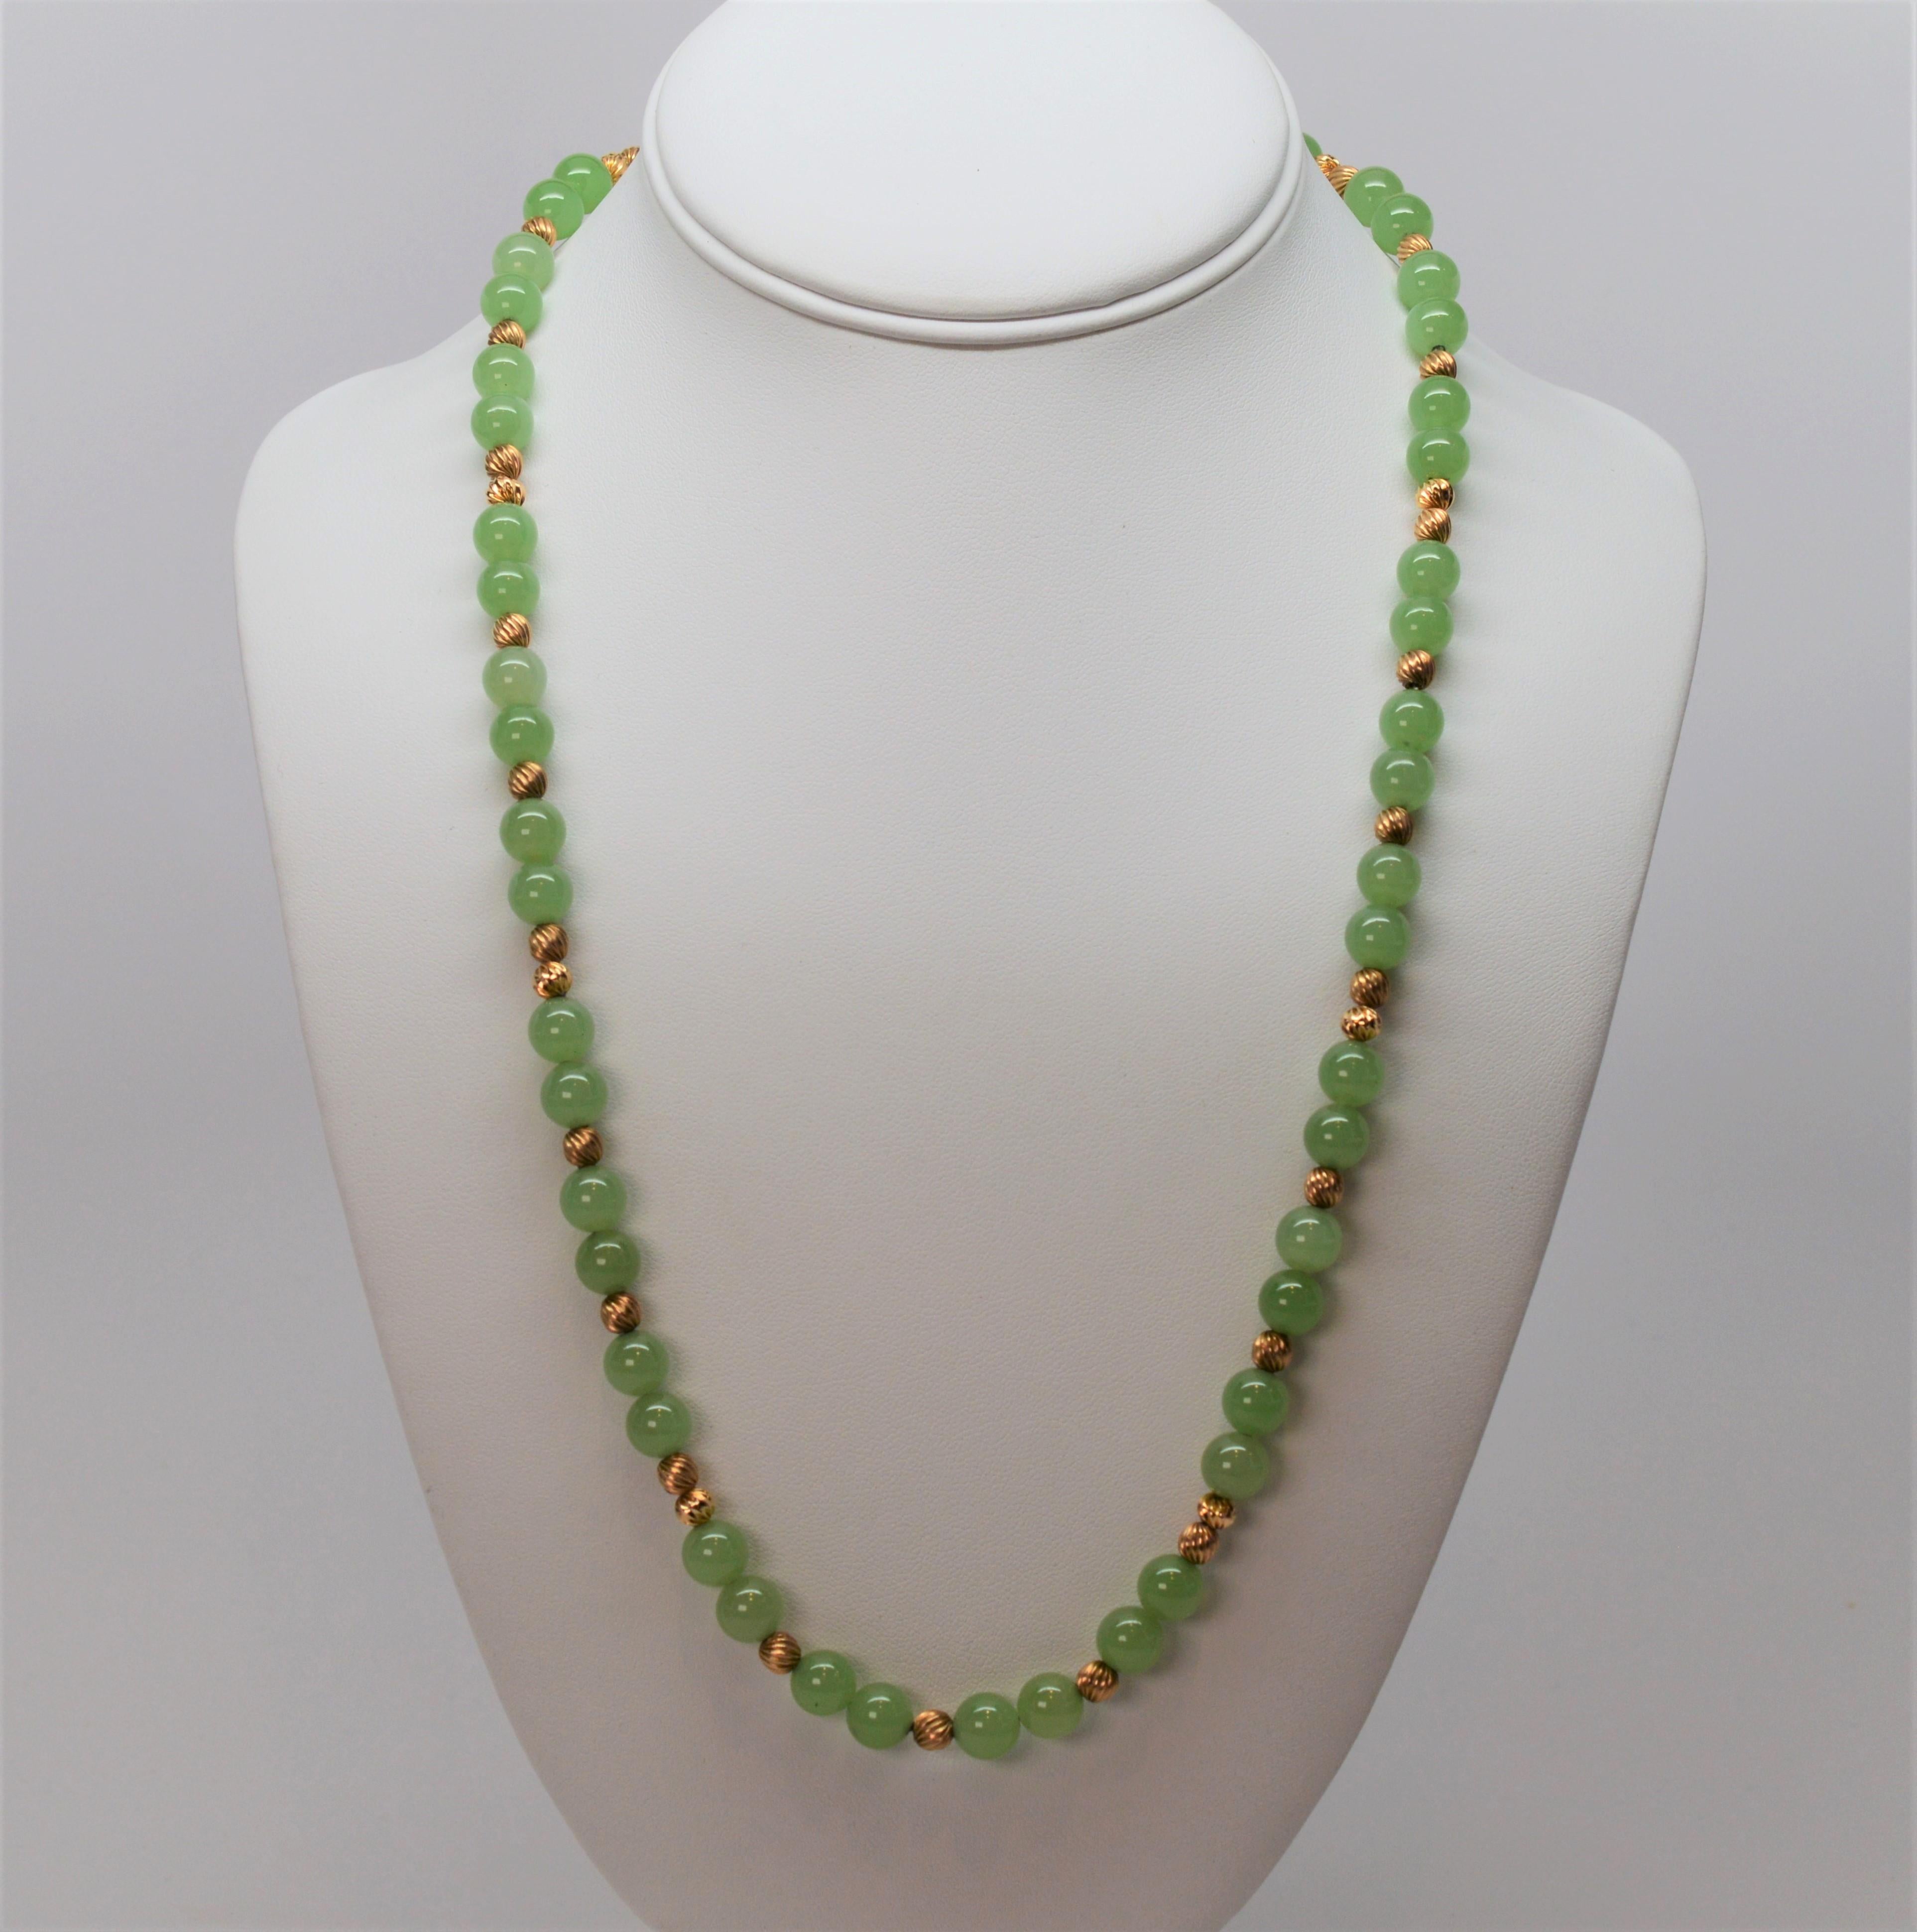 Antique Jadeite & 14 Karat Yellow Gold Beaded Necklace from the Susan VanGilder Estate Collection. Fifty-two 8-1/4mm natural, translucent soft moss green Jadeite beads are accented by thirty-three 5mm swirled finished 14K Antique Gold Beads to